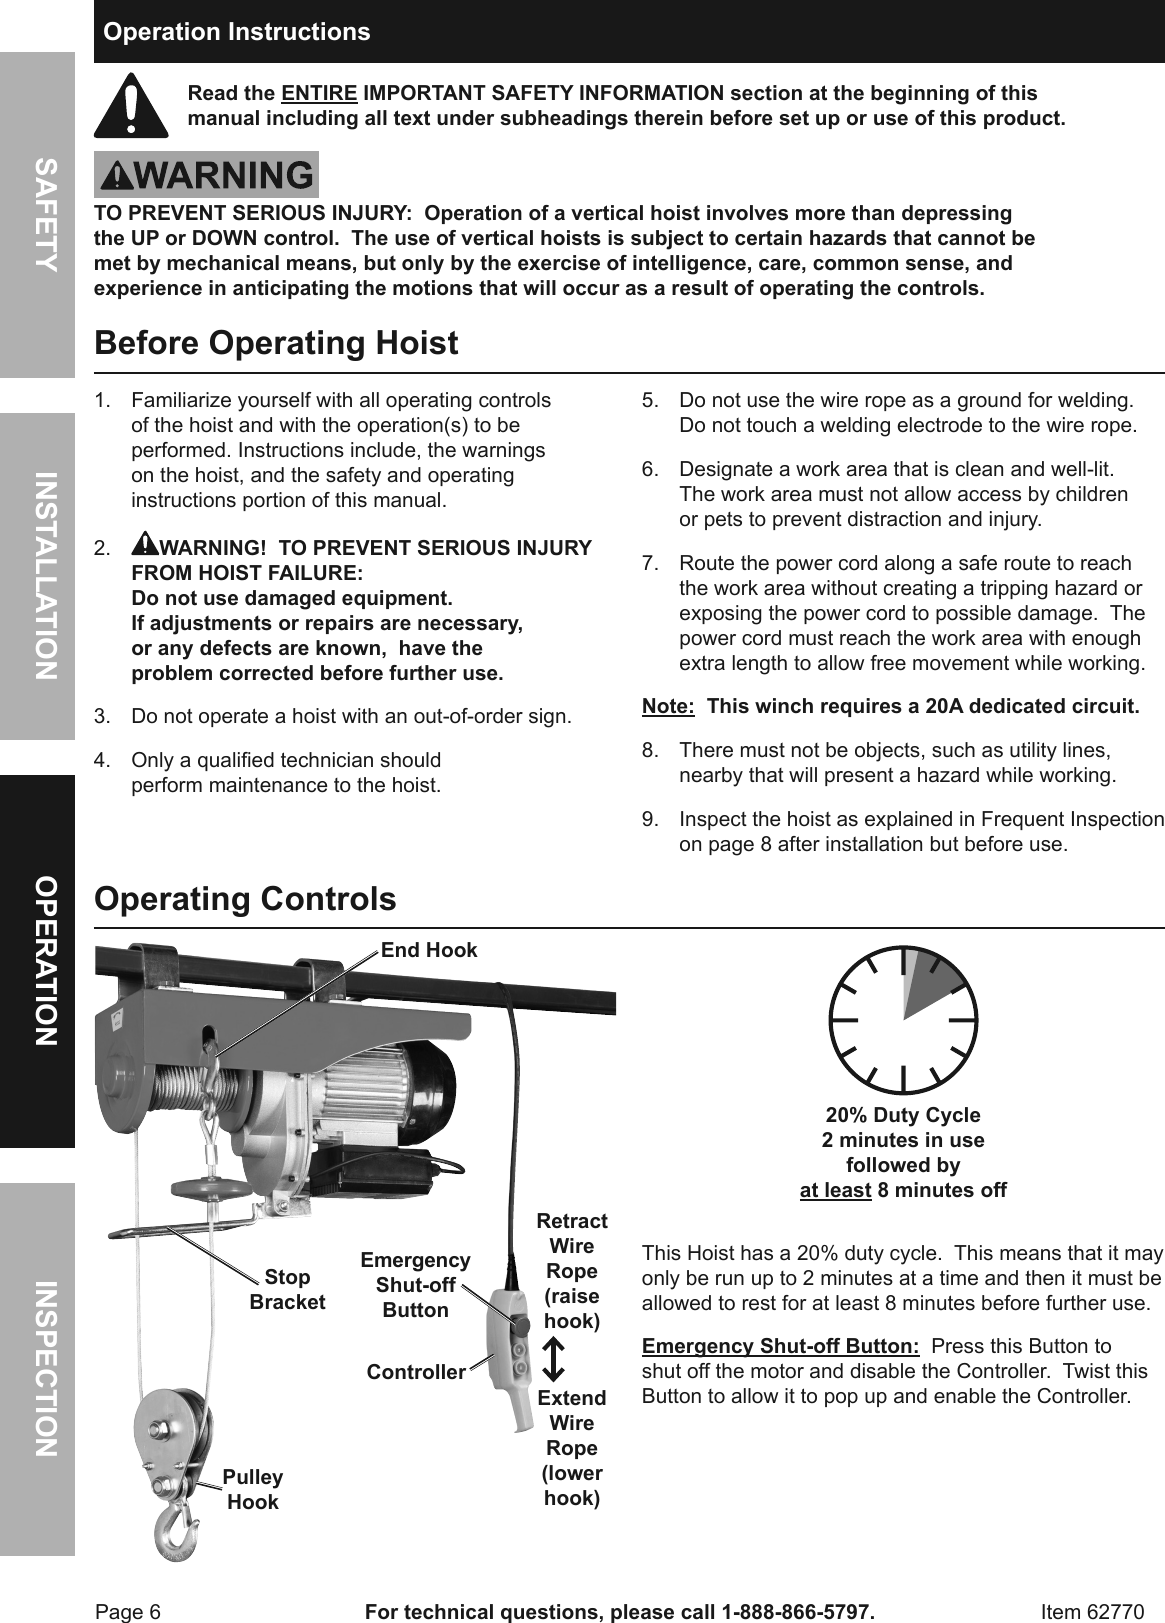 Page 6 of 12 - Manual For The 62770 2000 Lb. Electric Hoist With Remote Control